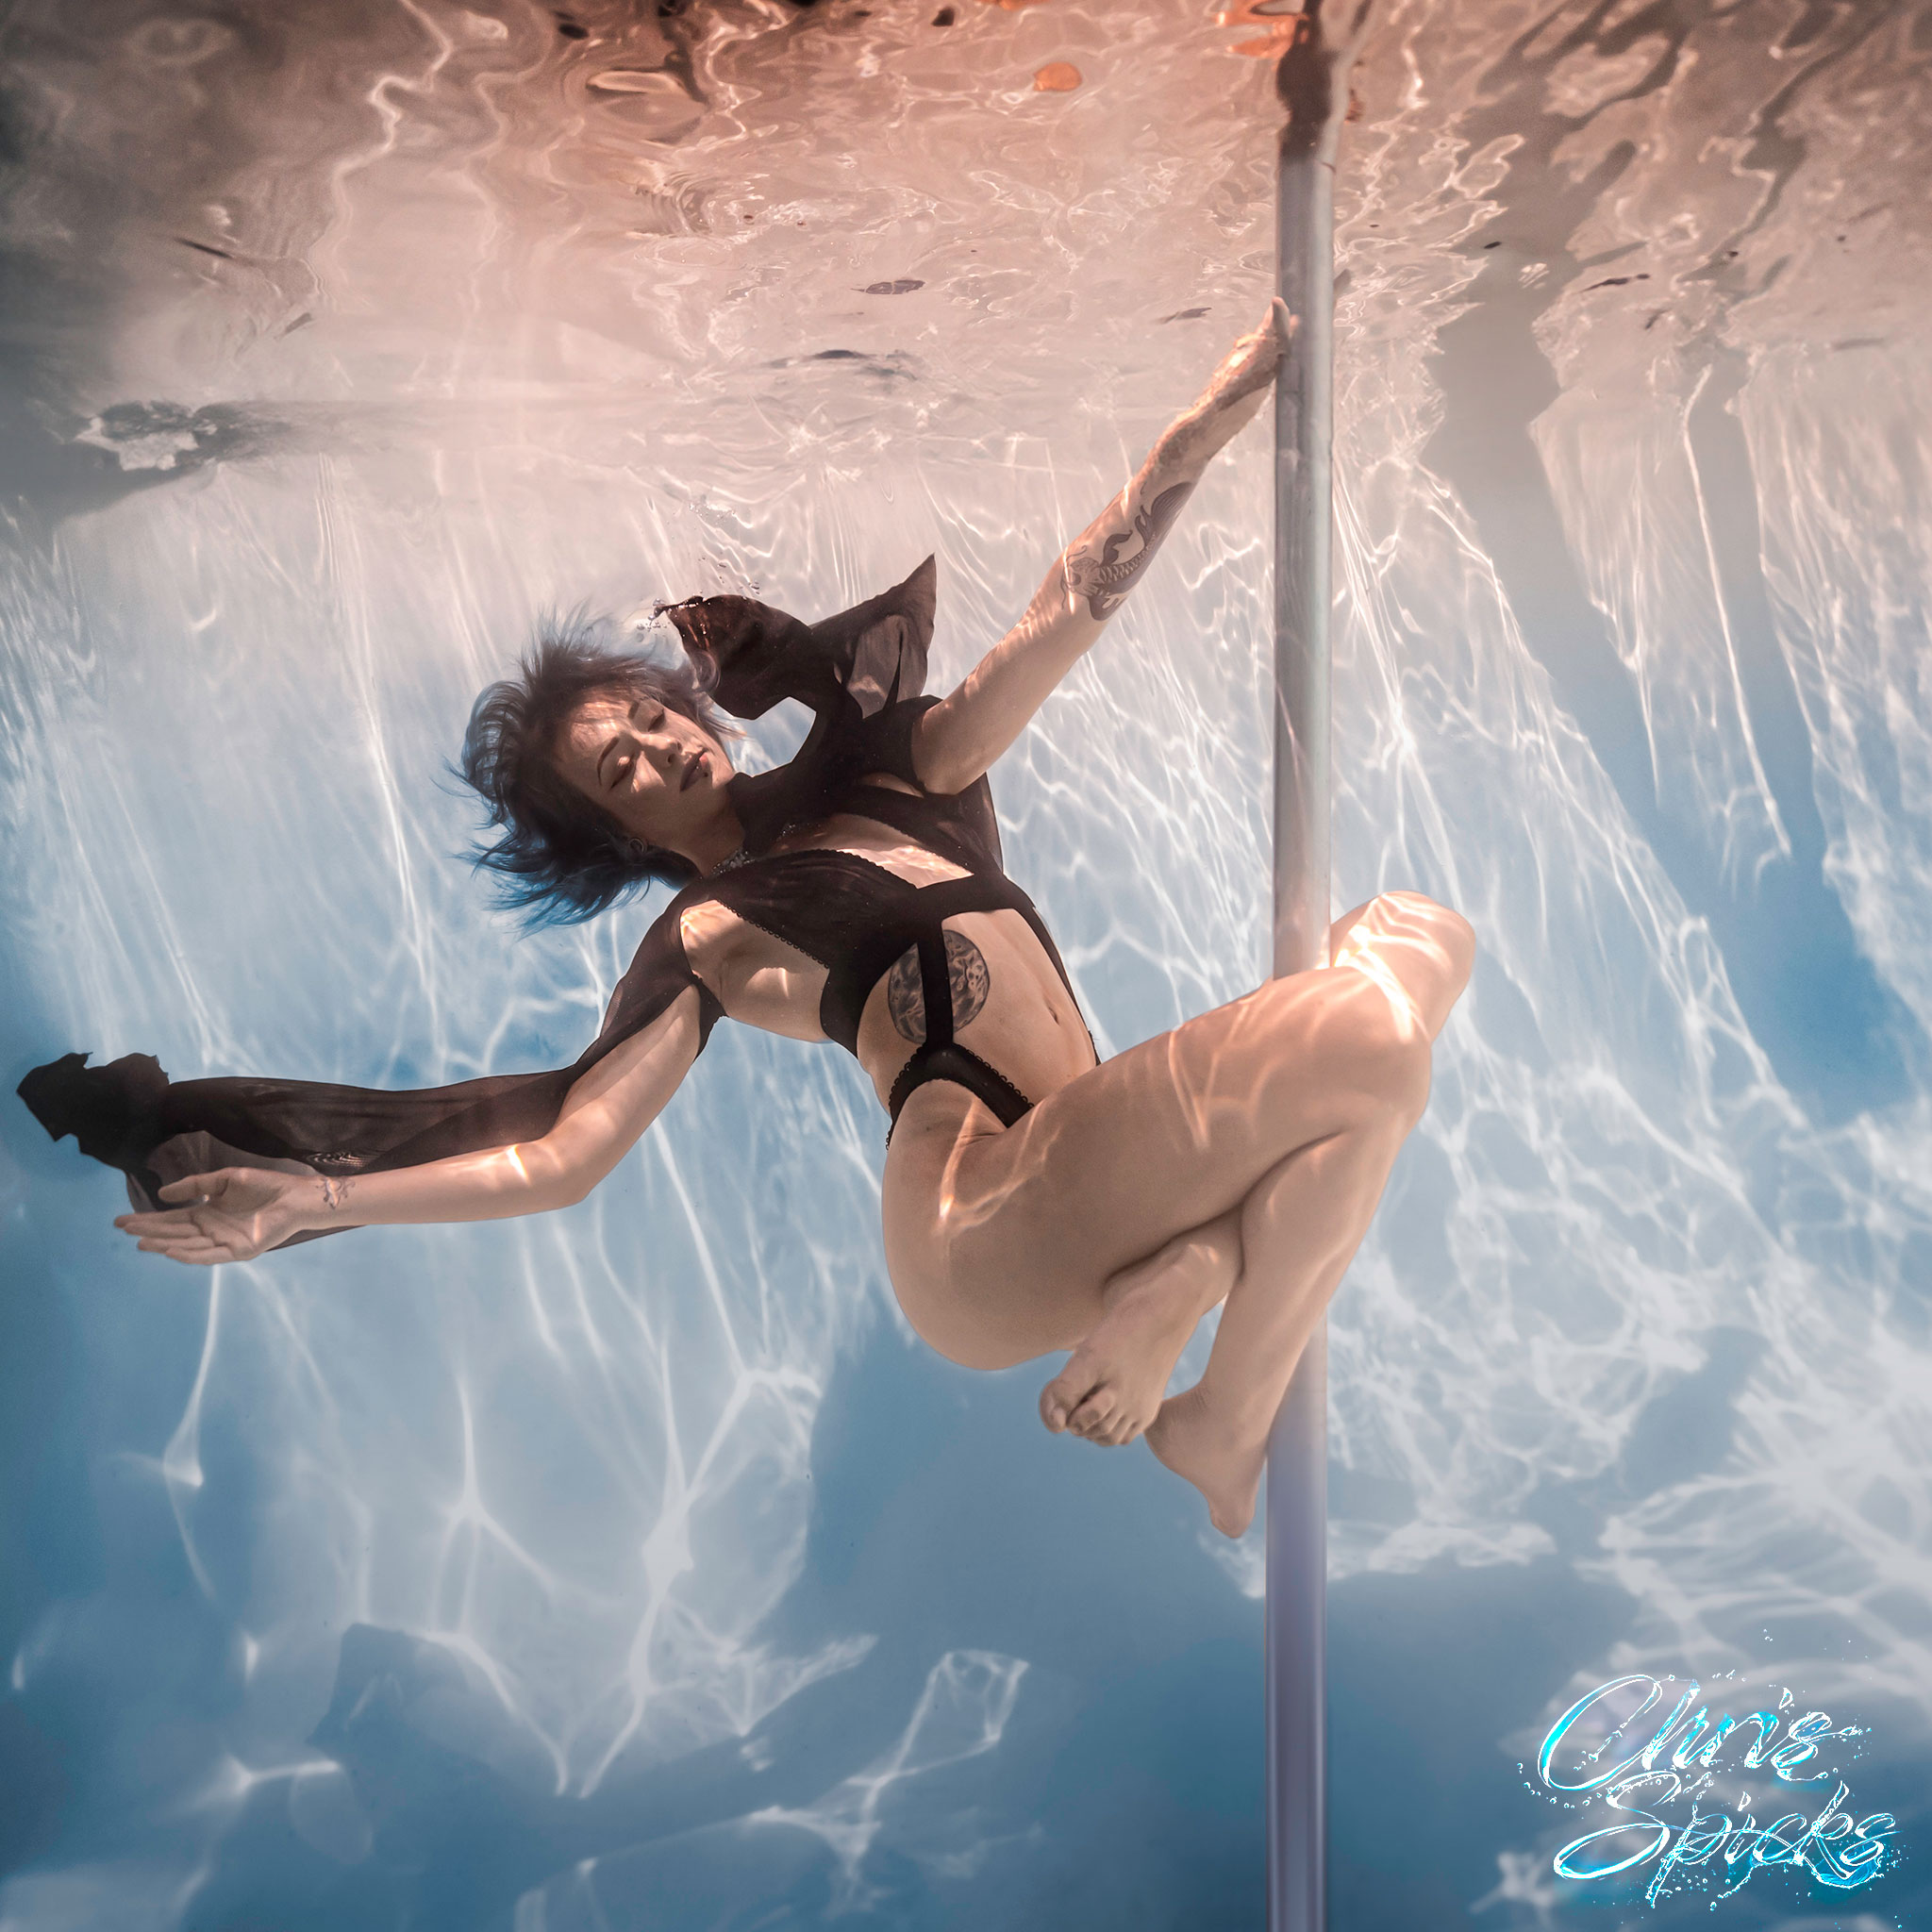 A person performs an underwater pole dance in a pool, wearing a black outfit with flowing sleeves.